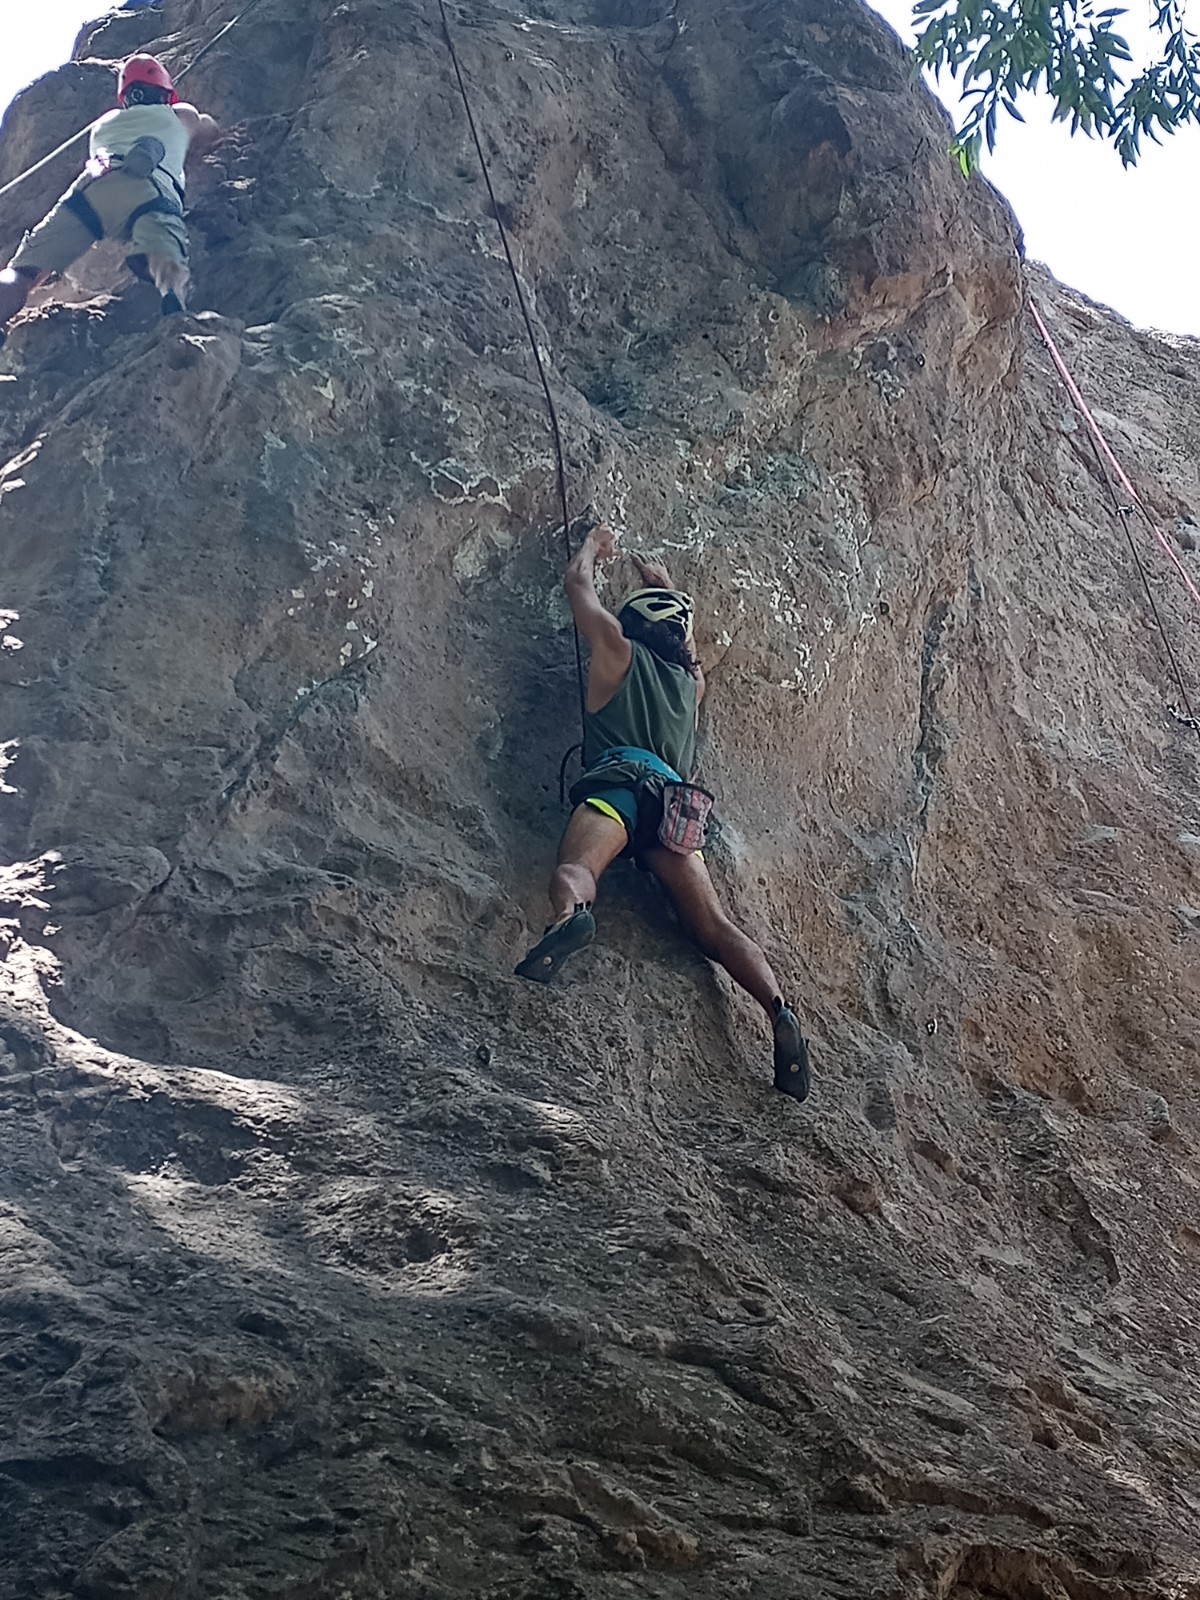 Me holding on to a rock with my fingertips, while top roping.